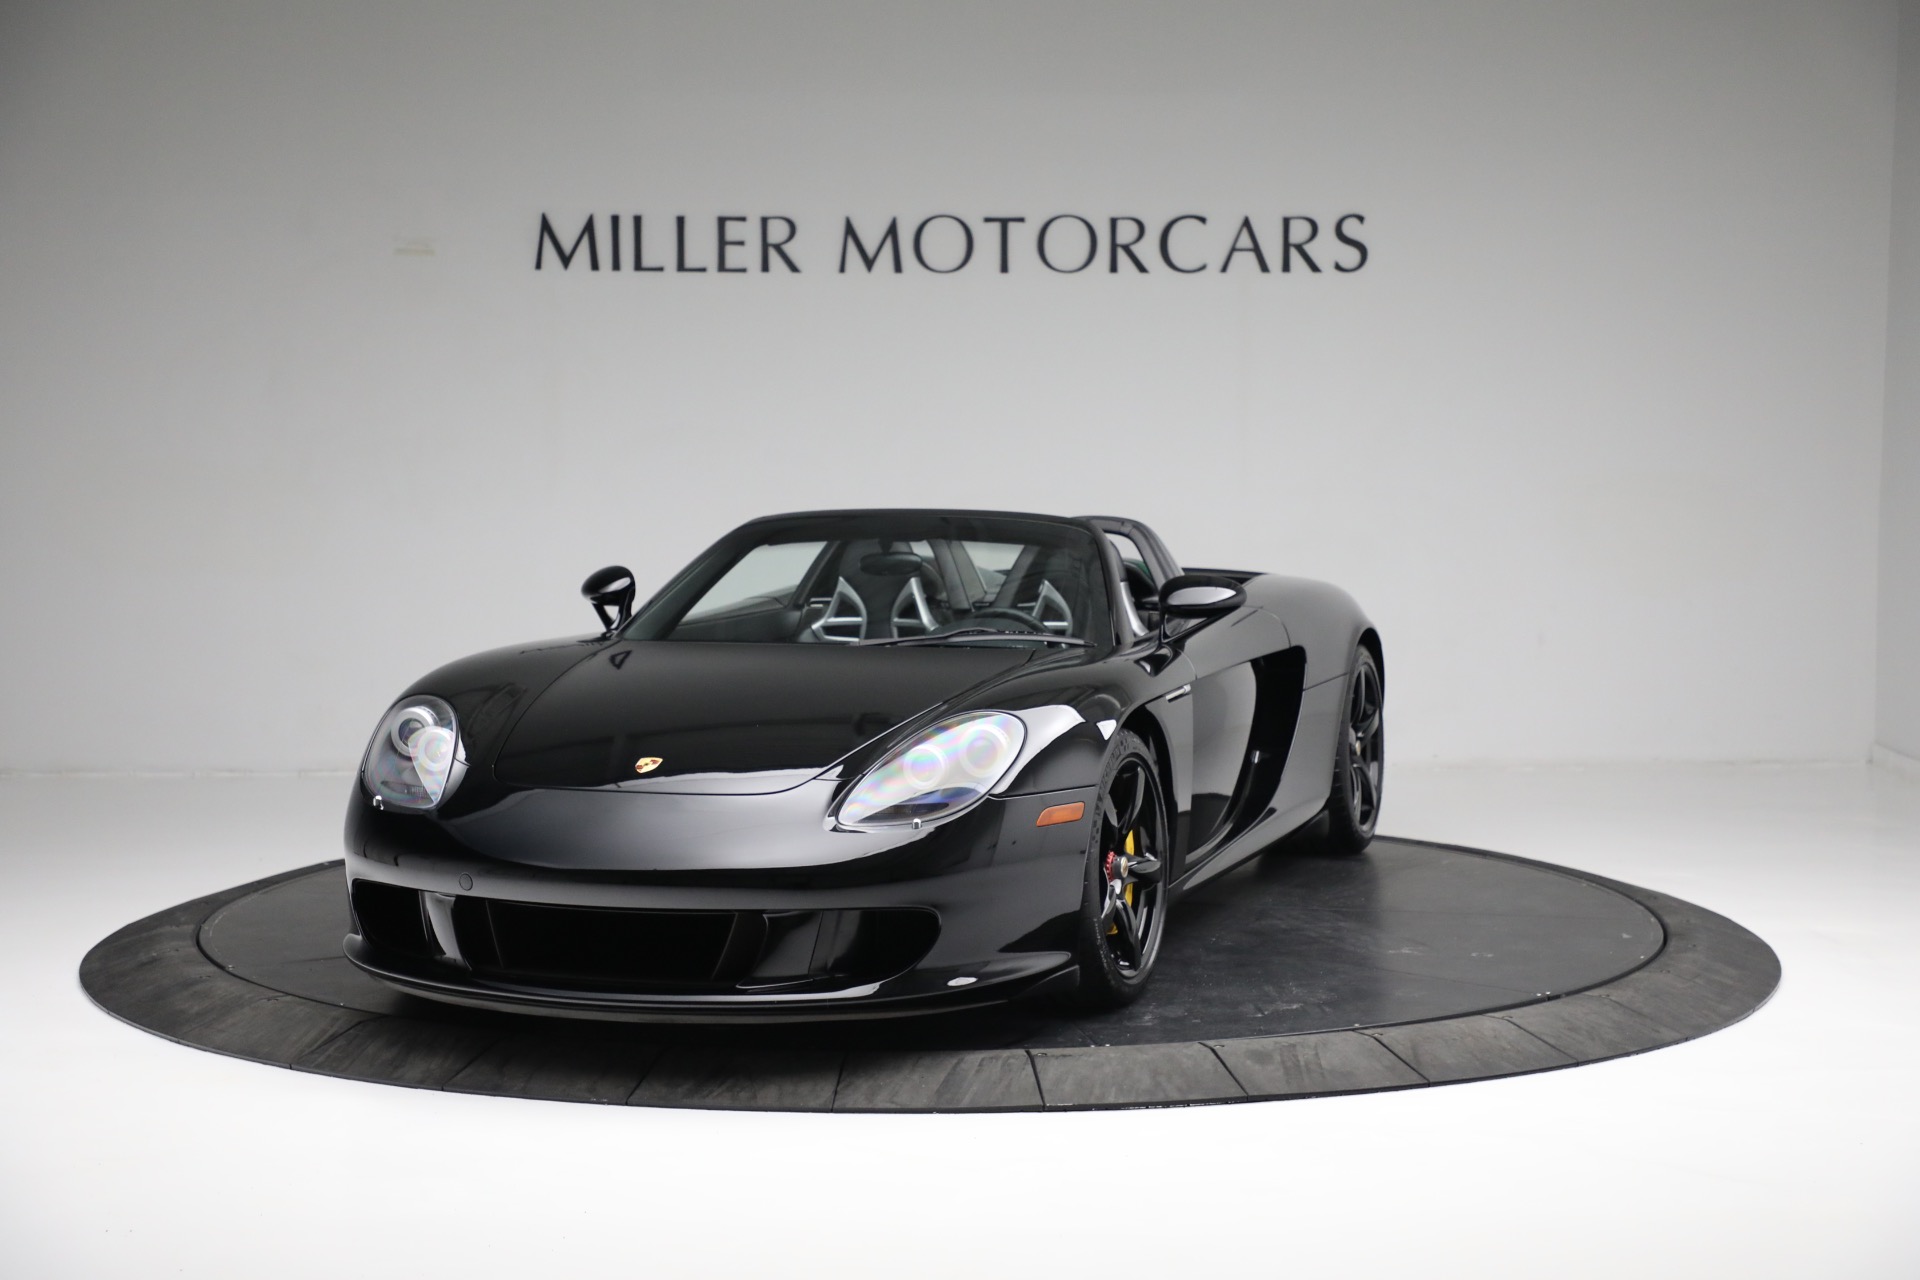 Used 2005 Porsche Carrera GT for sale Sold at Aston Martin of Greenwich in Greenwich CT 06830 1